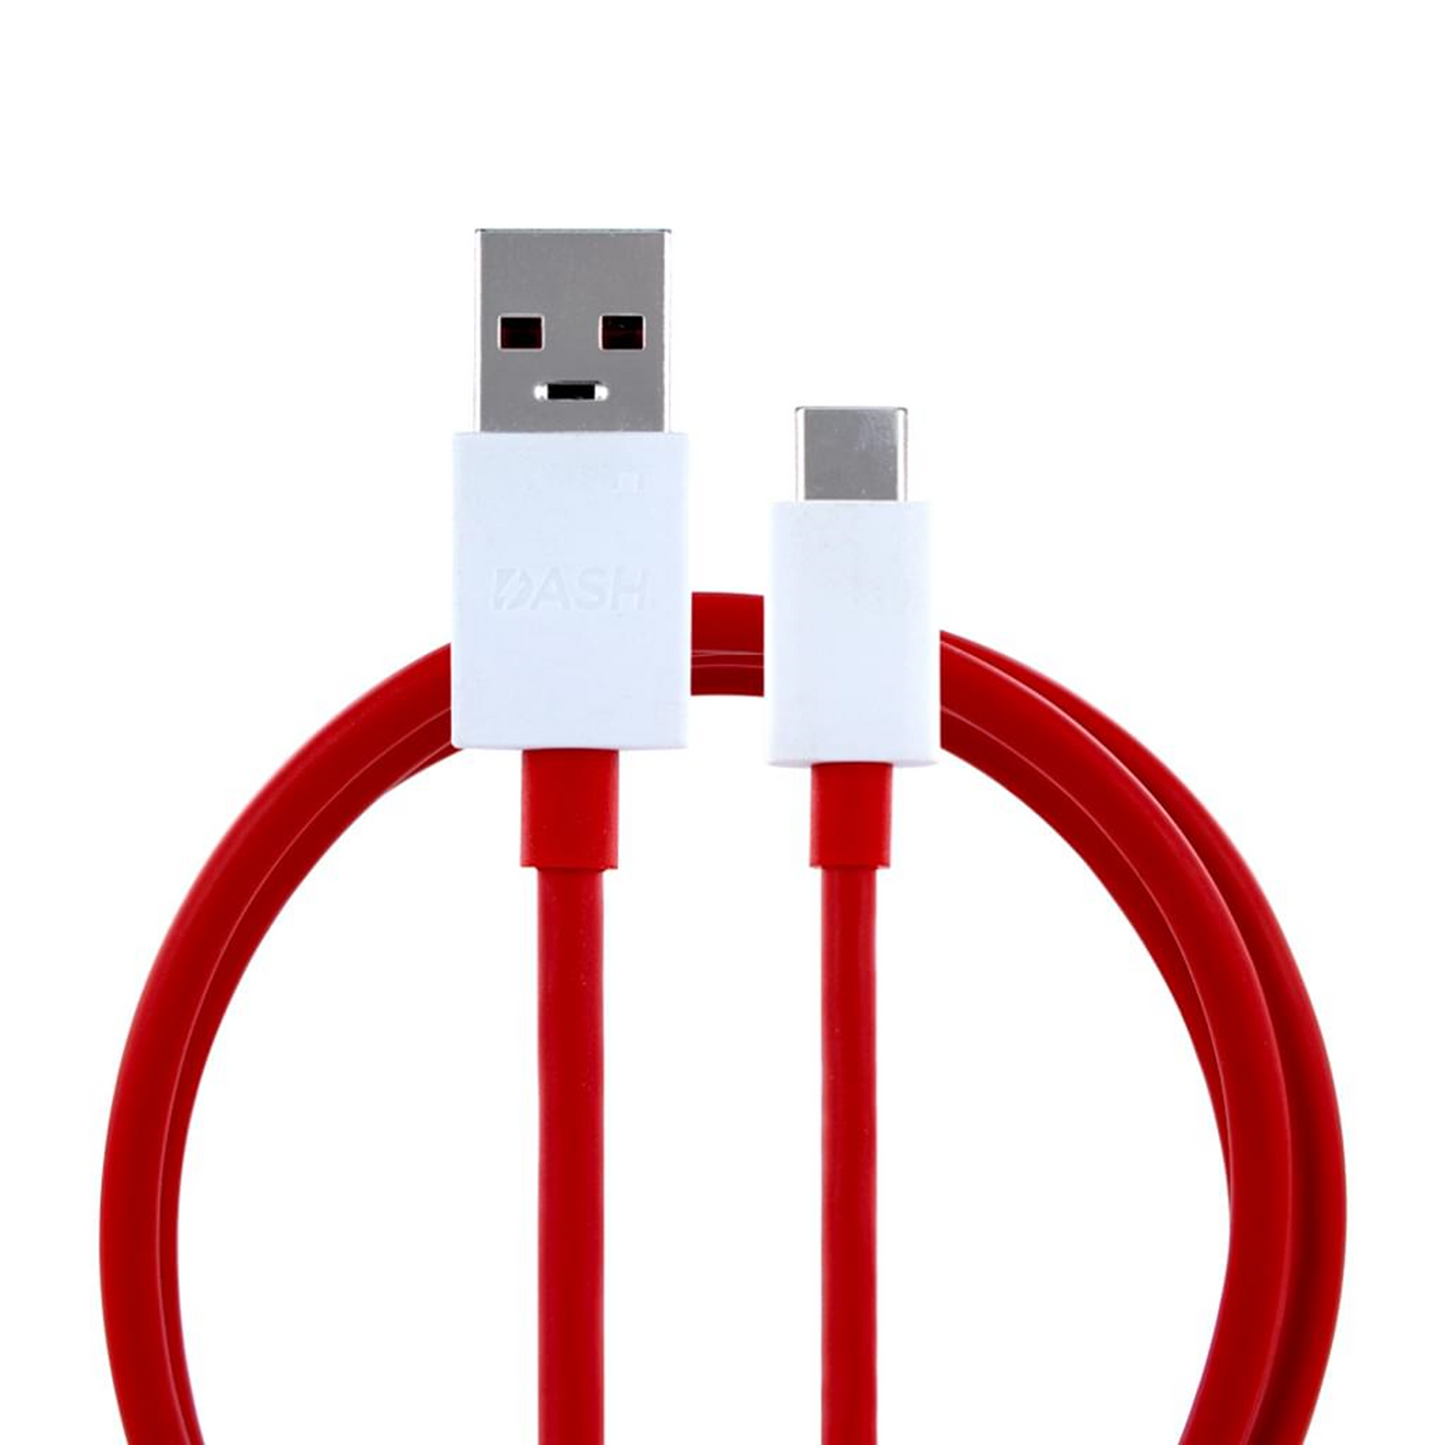 2M OnePlus Dash Type C USB Fast Charger Data Cable for 2 3 3T 5 5T 6 7 8 9 10